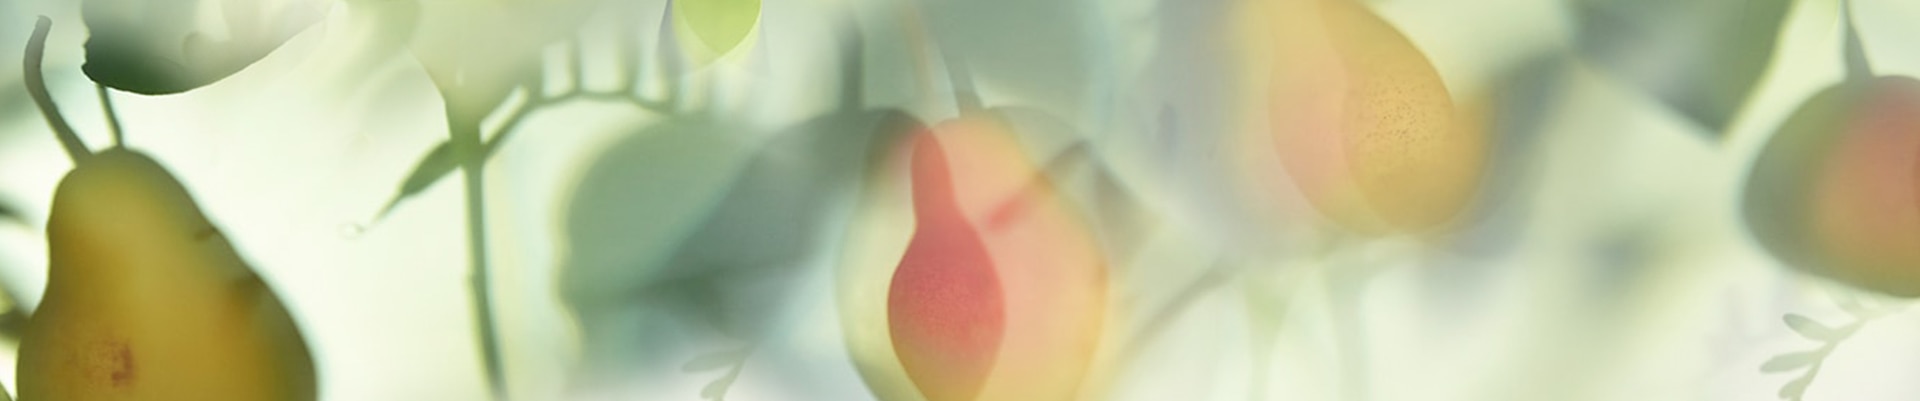 image of pears, an ingredient in english pear & freesia a fruity perfume, growing on a tree